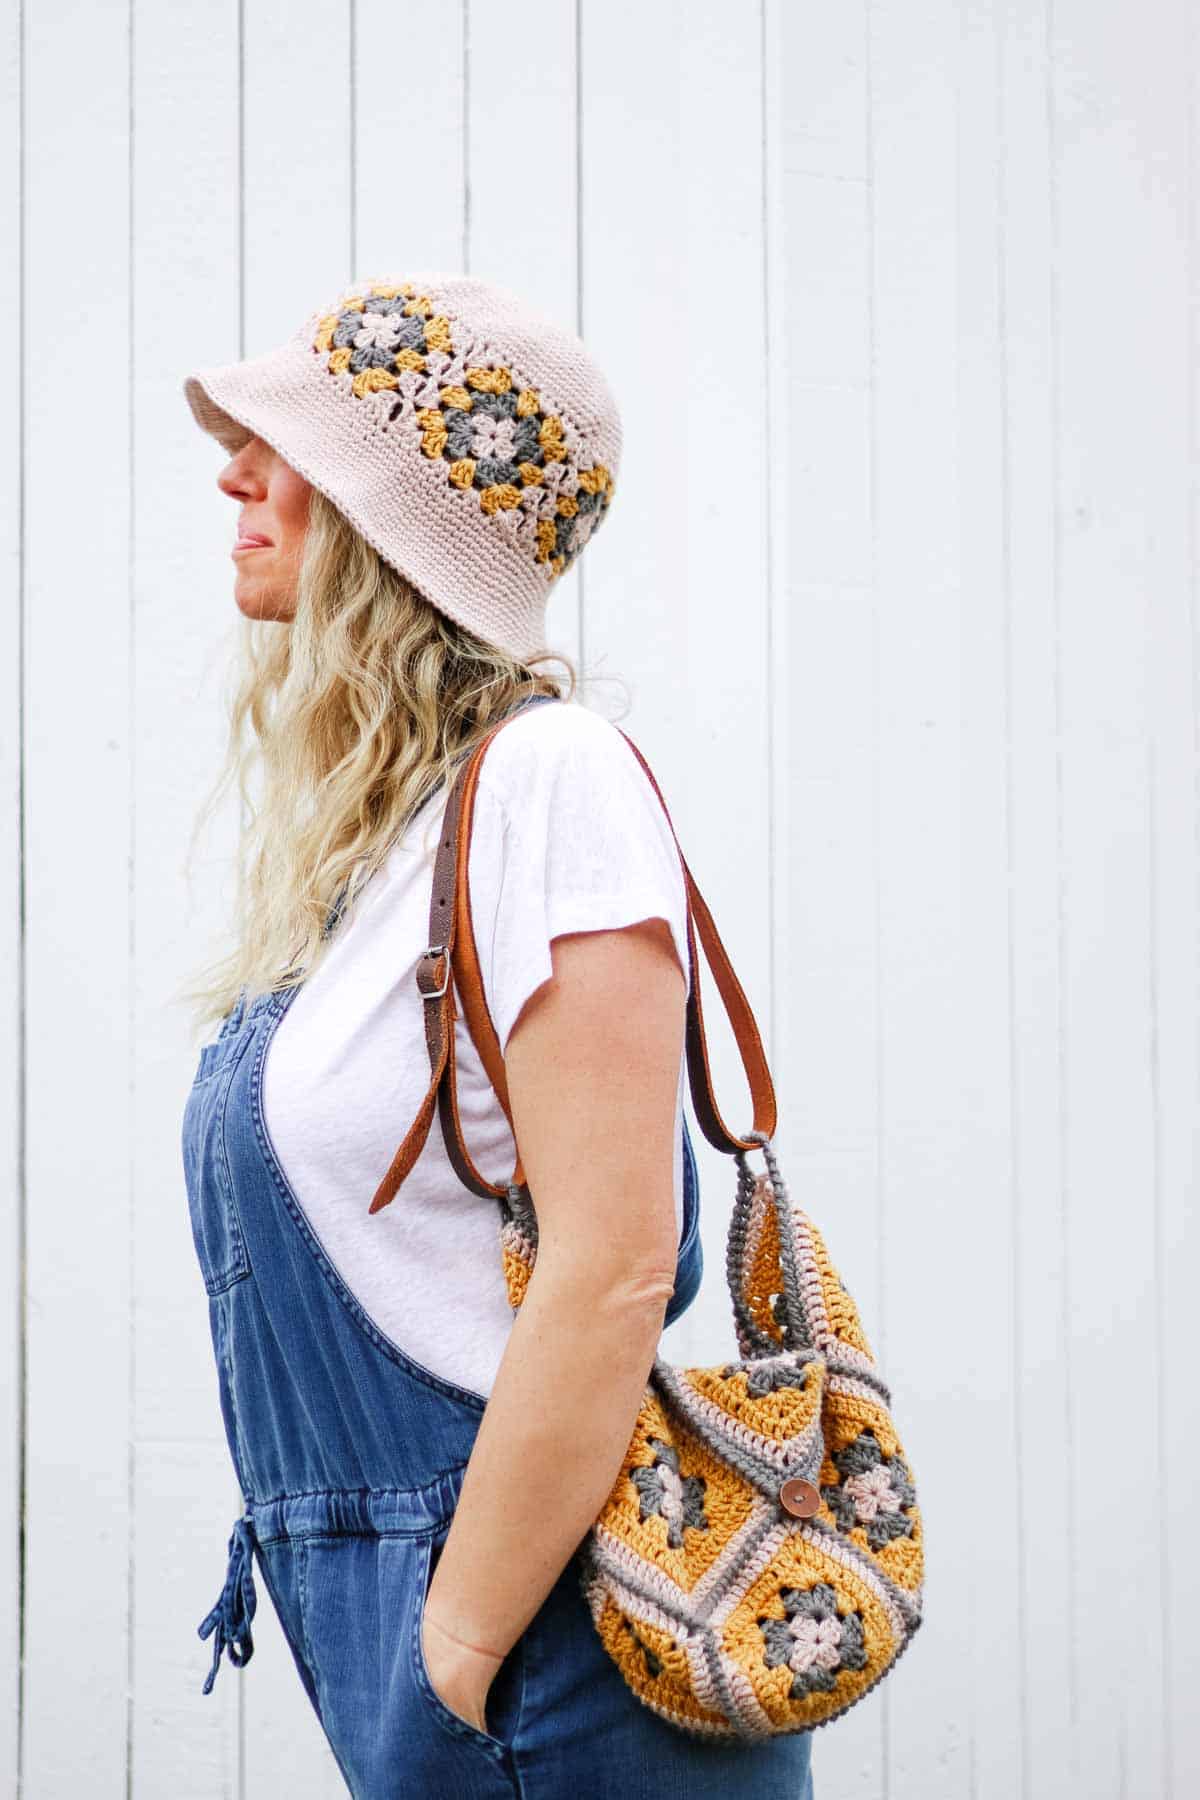 A woman with blonde hair wearing overalls, a white tee shirt, a crochet granny square hat and a crochet granny square purse with a leather strap. She is looking and facing left with her hand in her pocket.